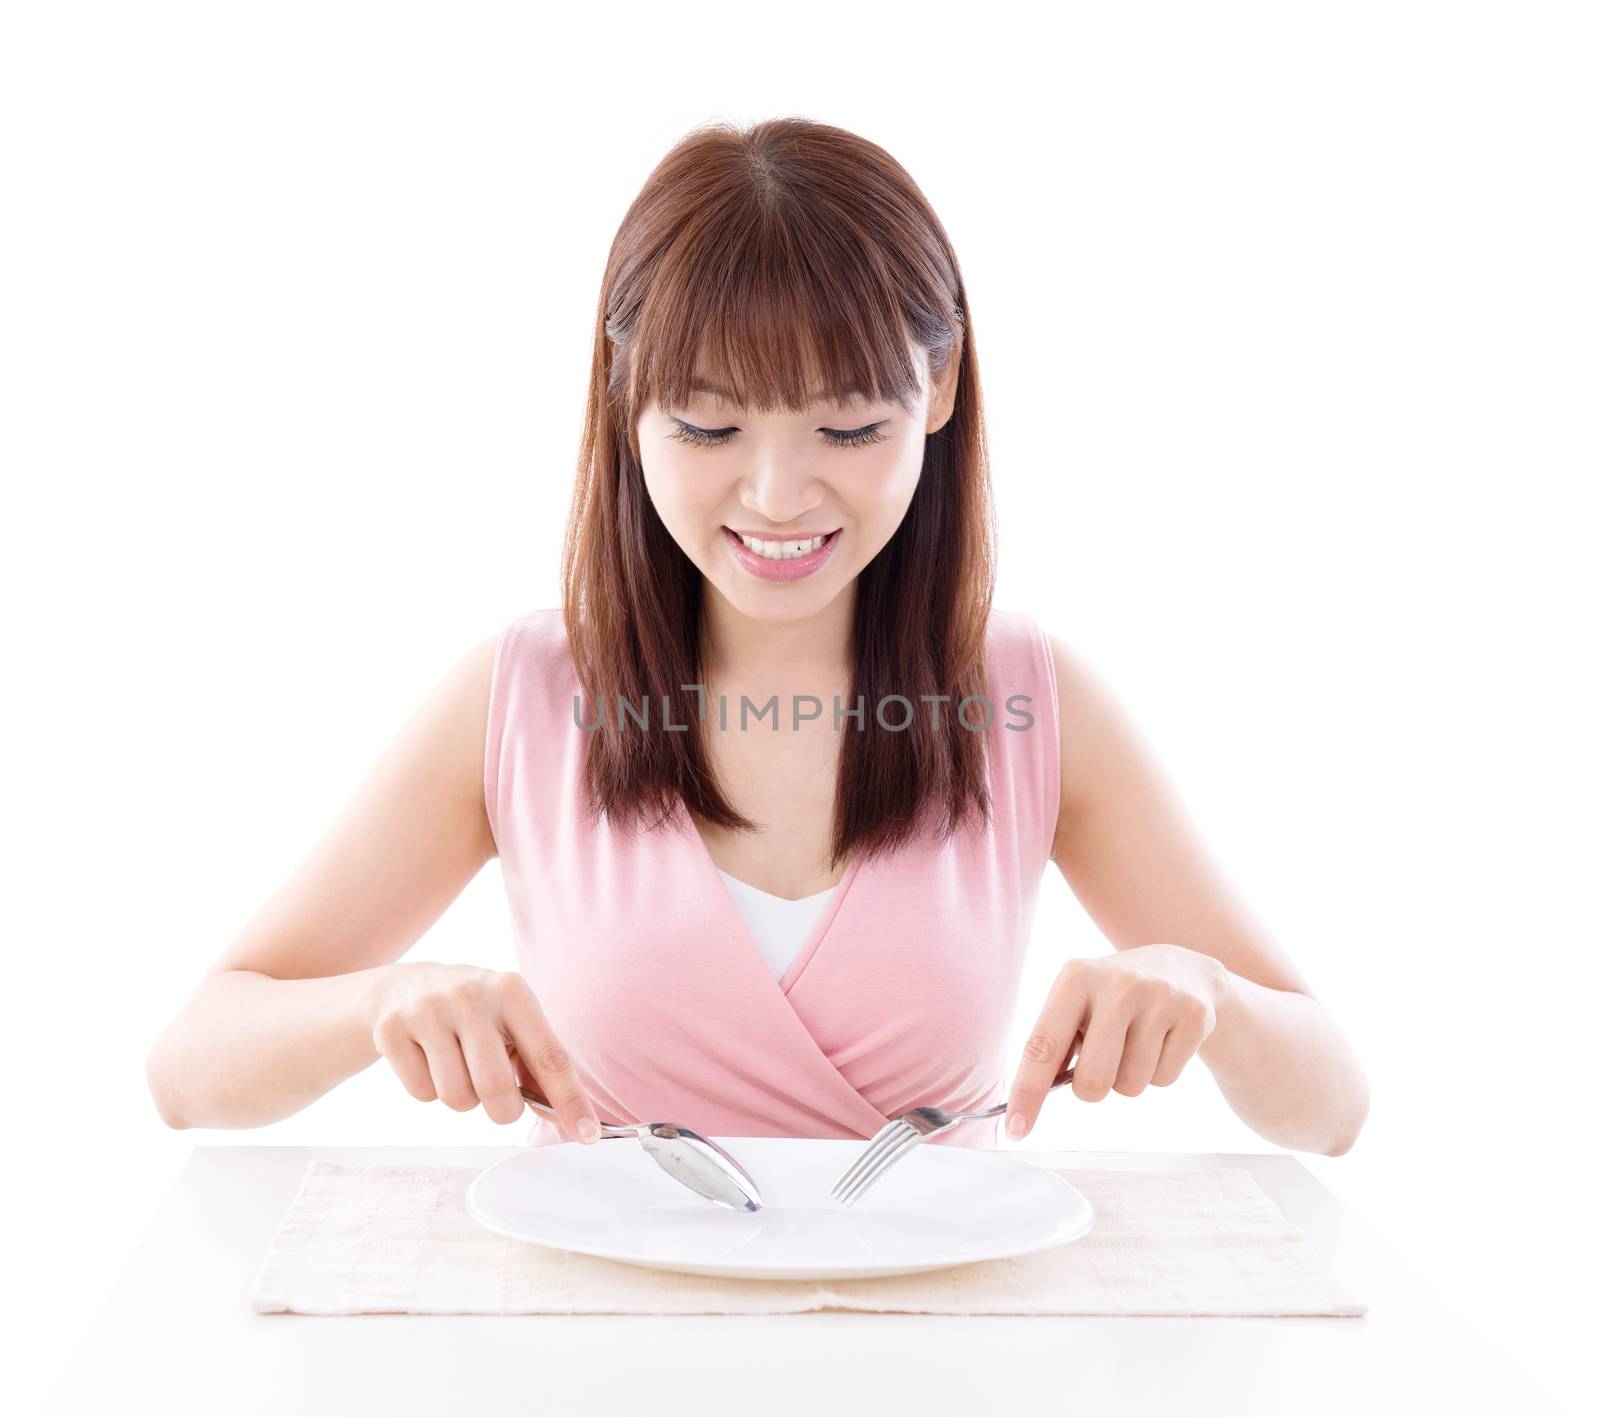 Asian girl eating with fork and spoon, empty plate ready for food. Young woman living lifestyle.